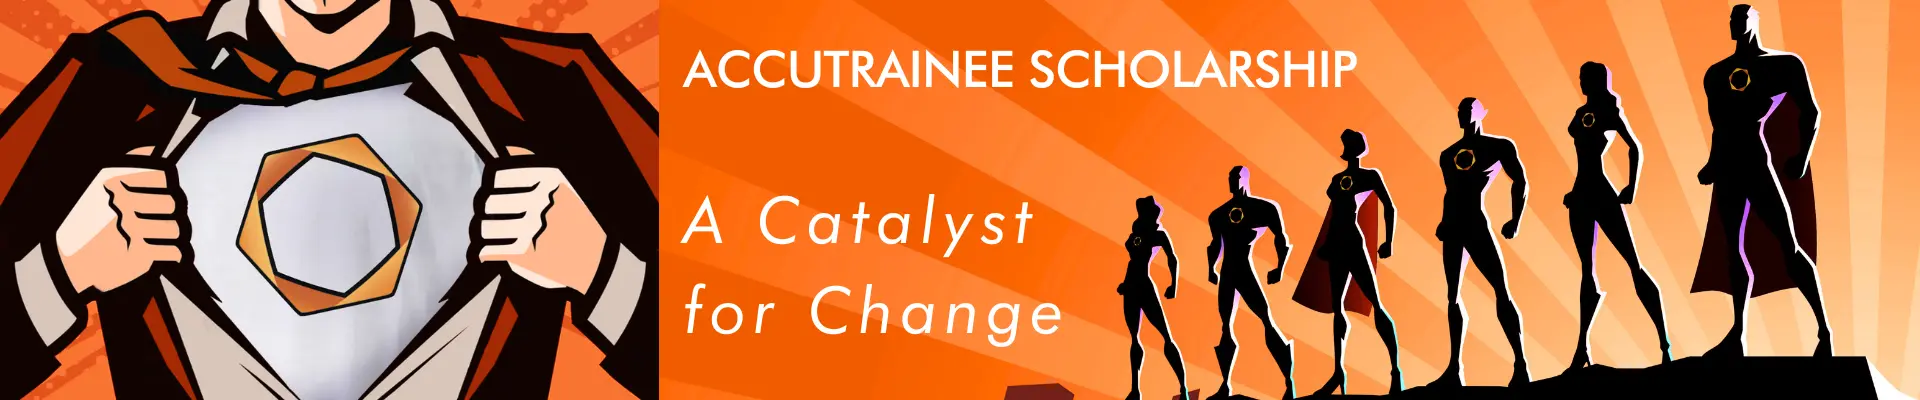 Accutrainee Scholarship - A catalyst for change in law